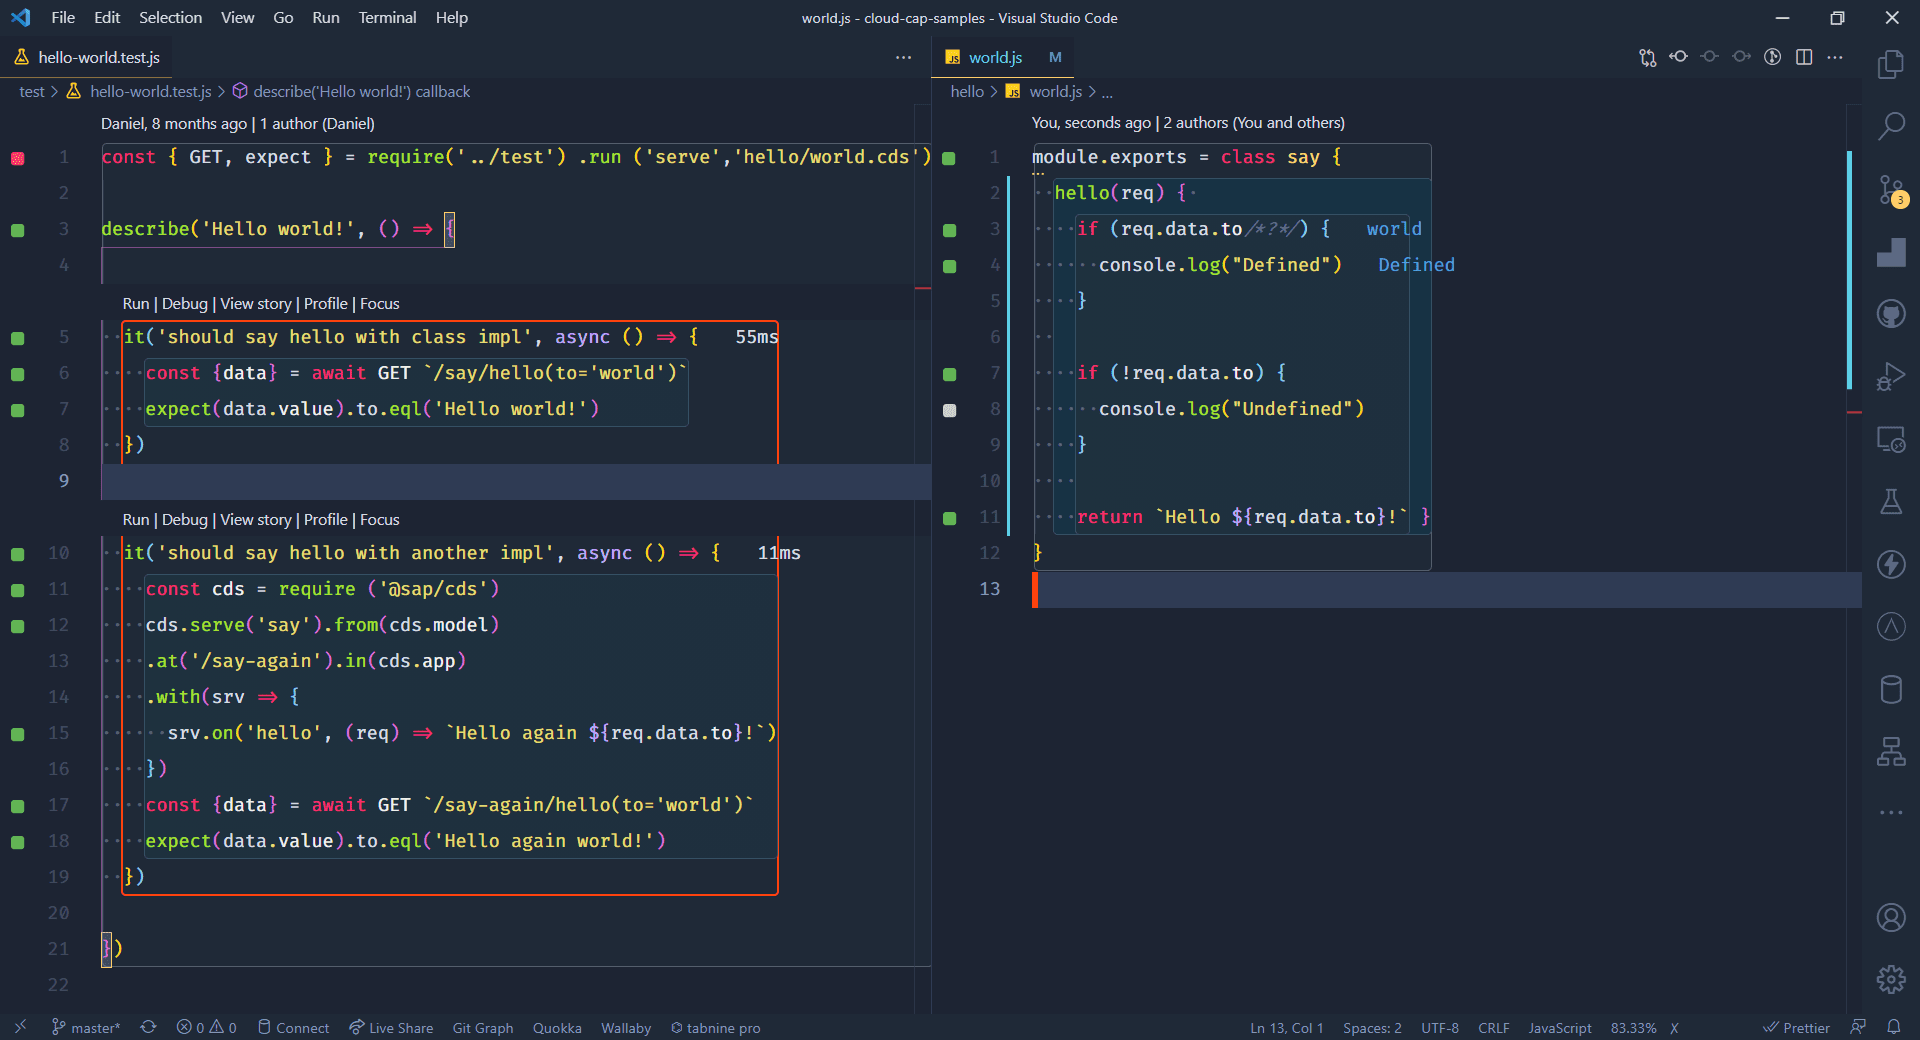 VSCode Wallaby